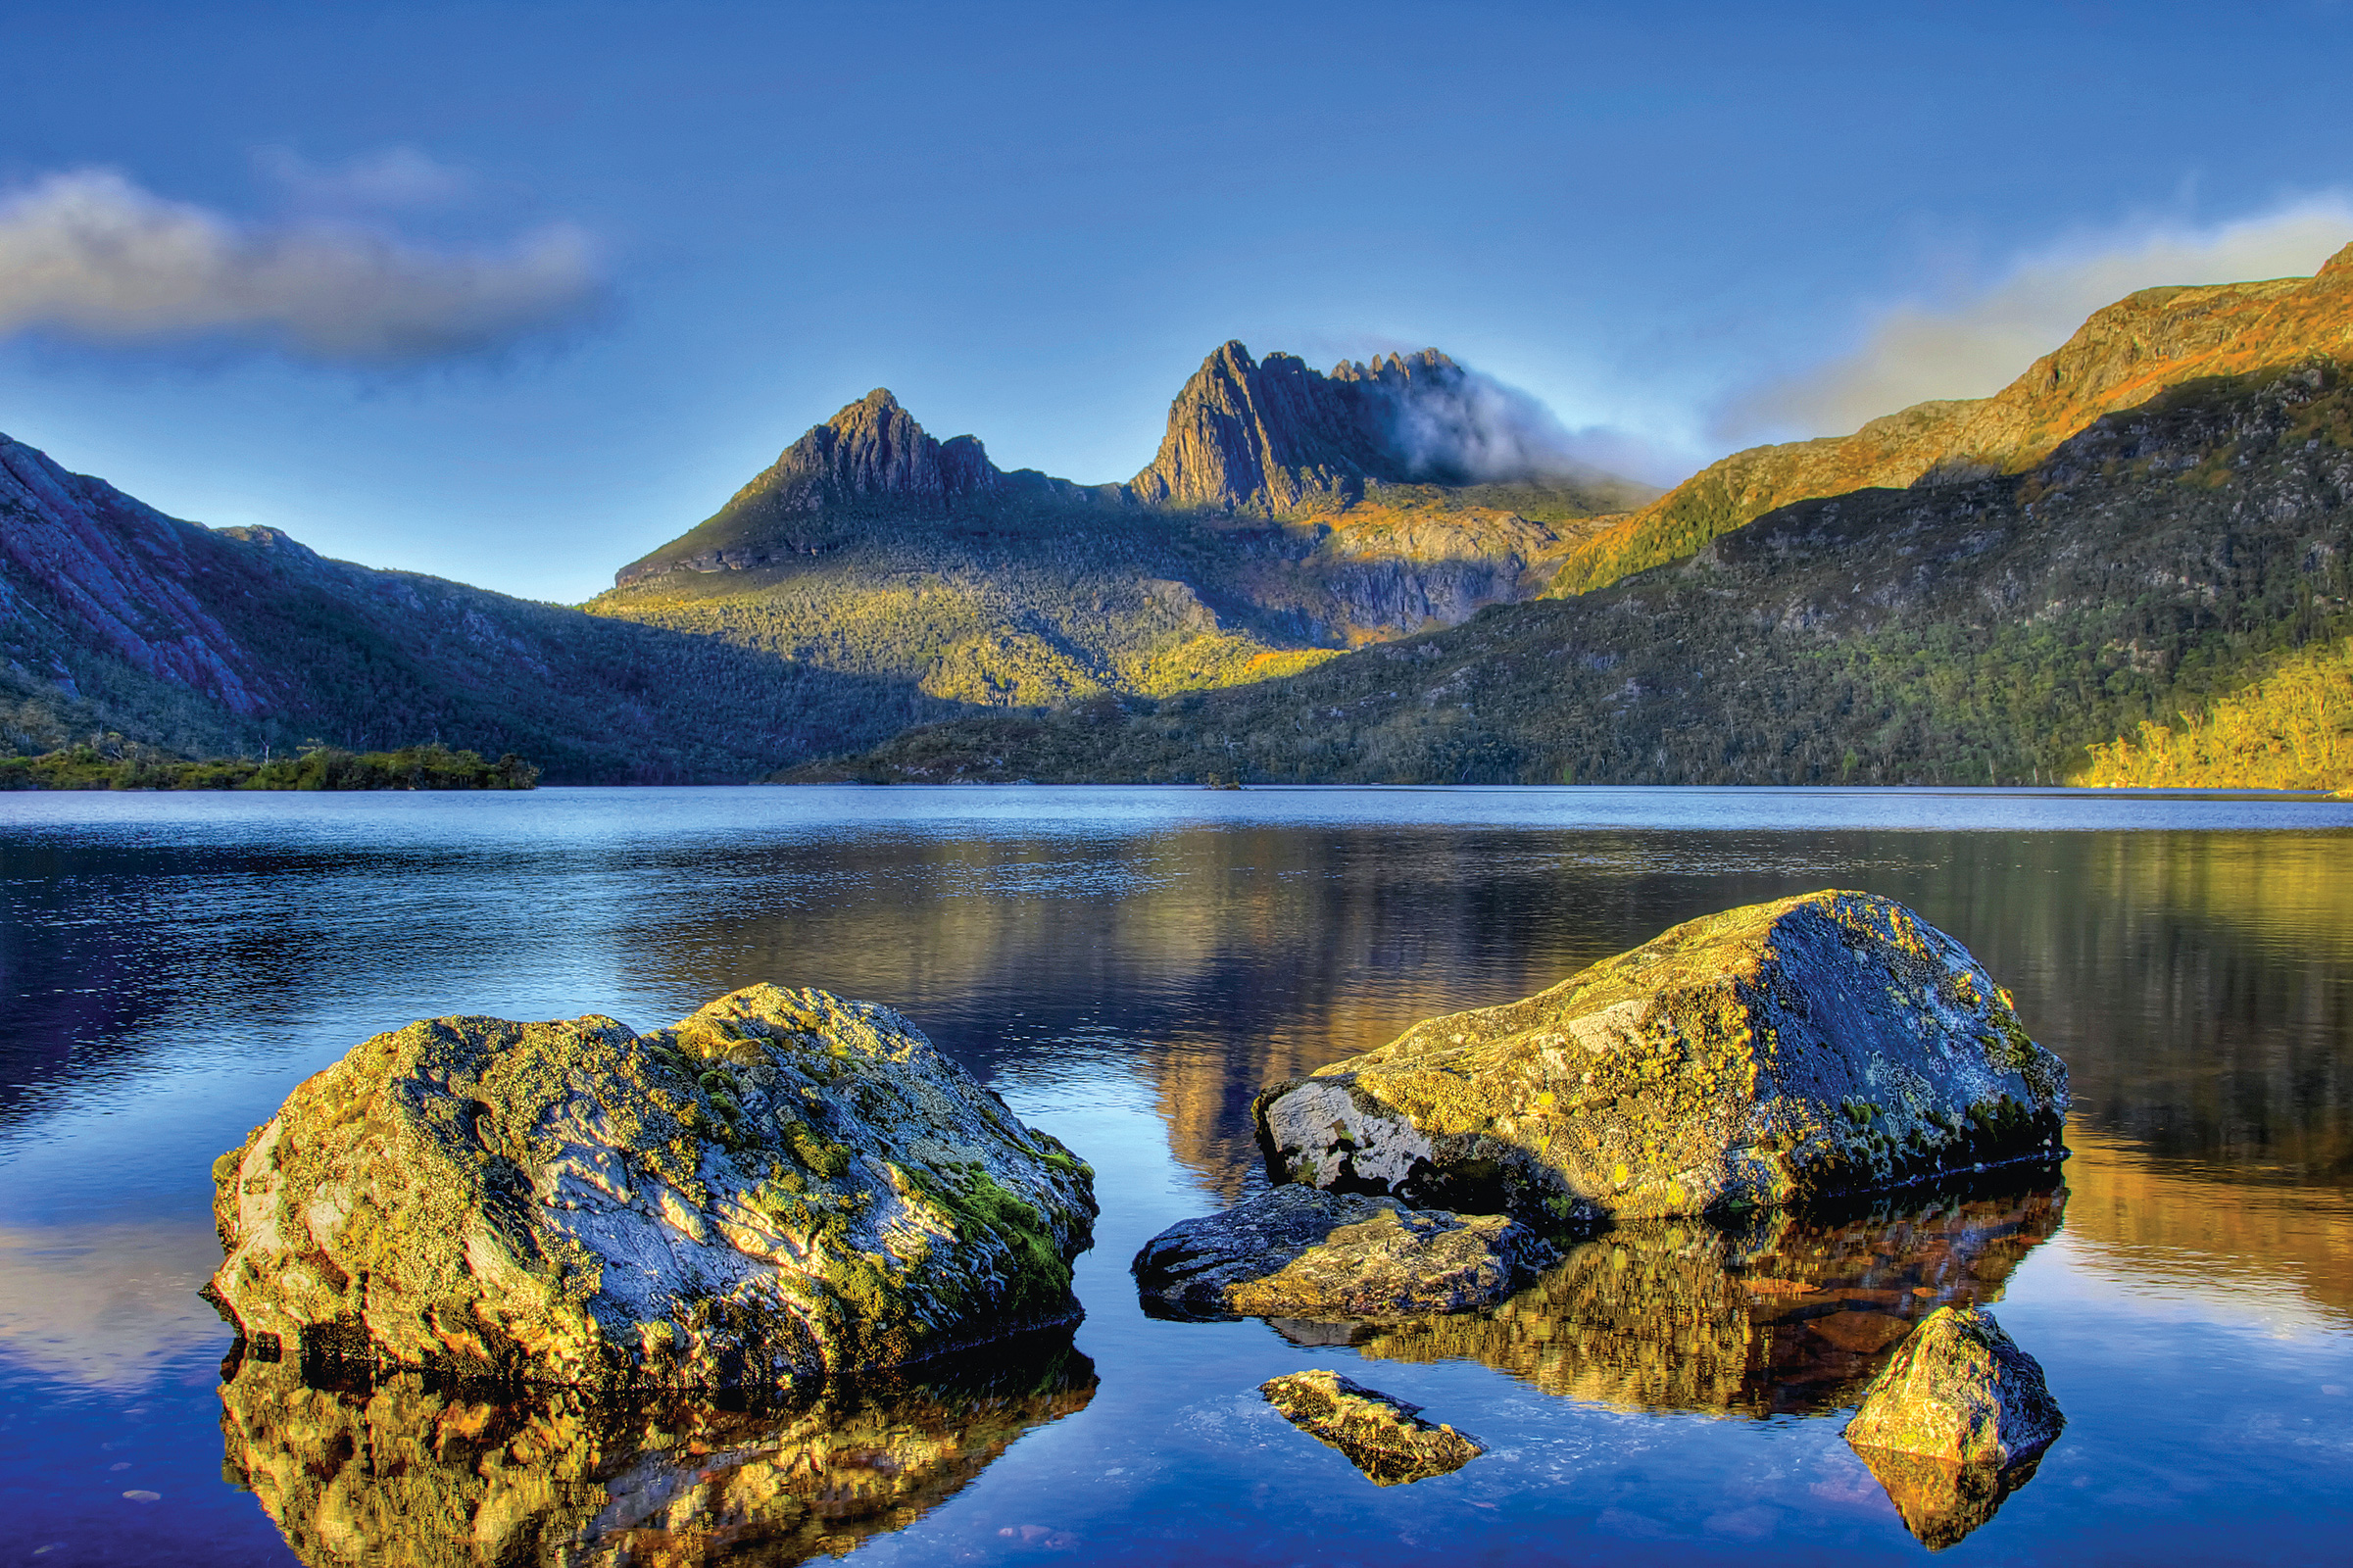 The starting point, Cradle Mountain. PICTURE CREDIT: Hans Harms/Getty Images